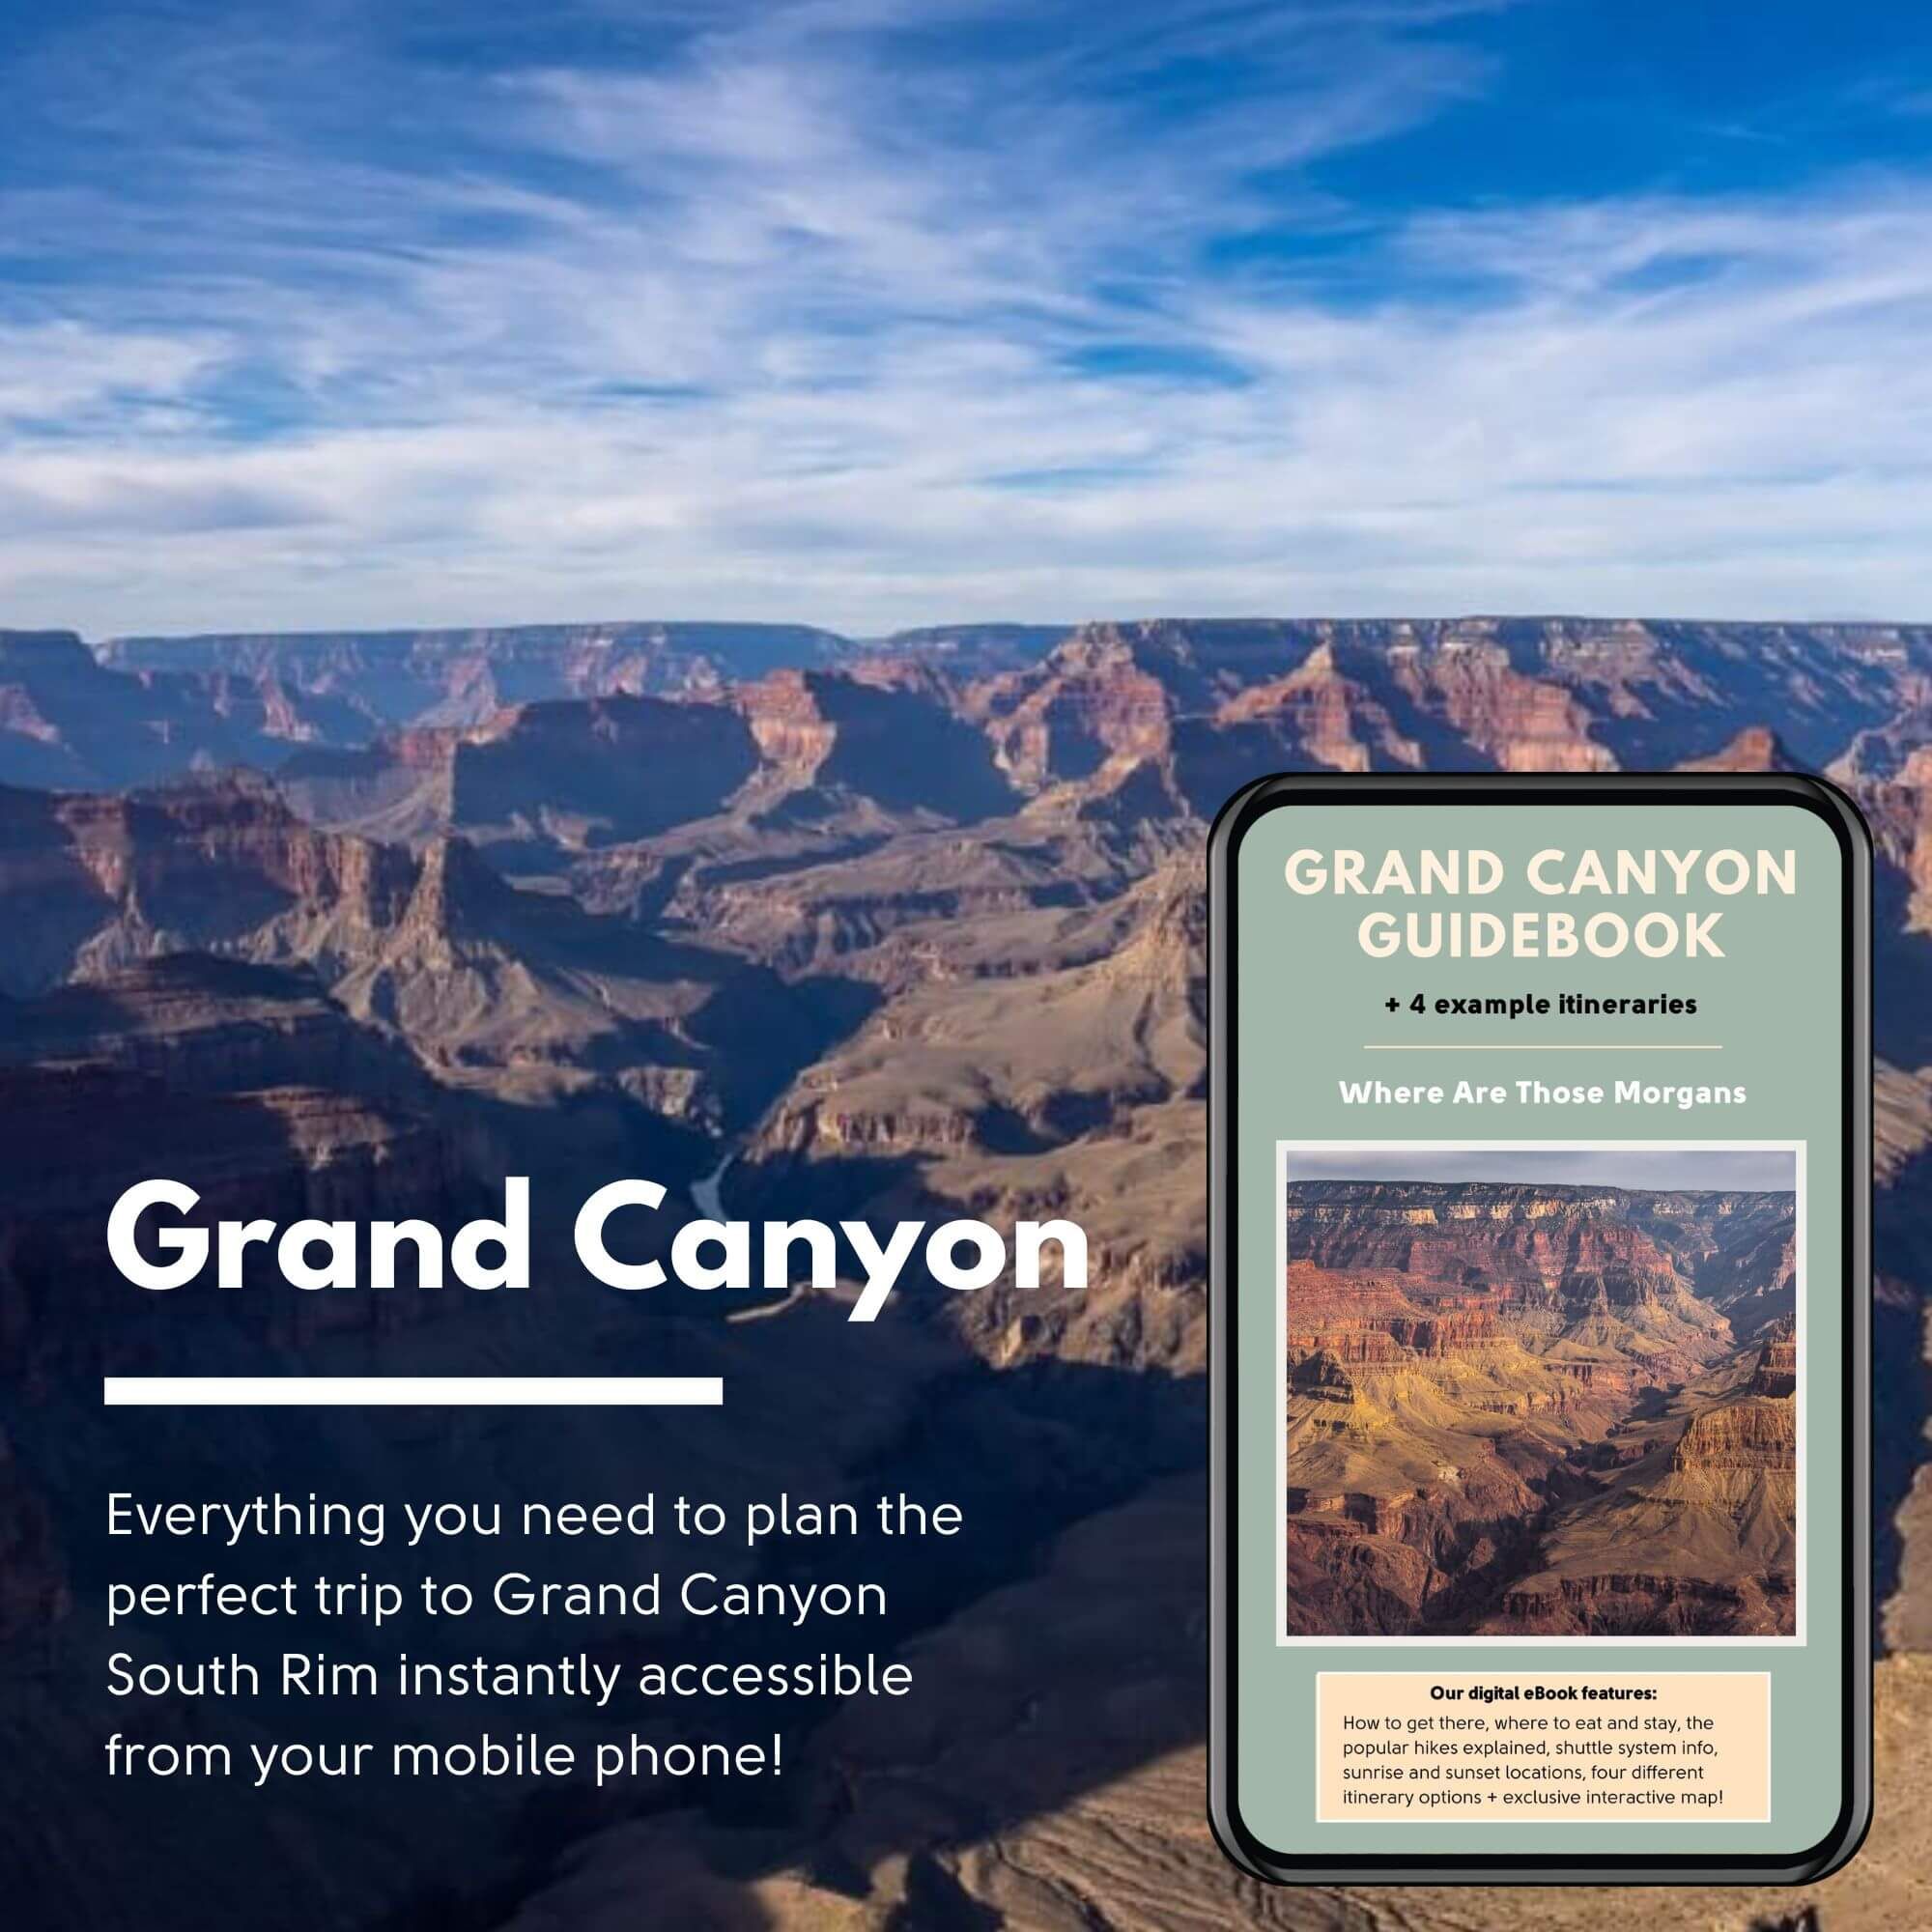 Where Are Those Morgans Grand Canyon travel guidebook